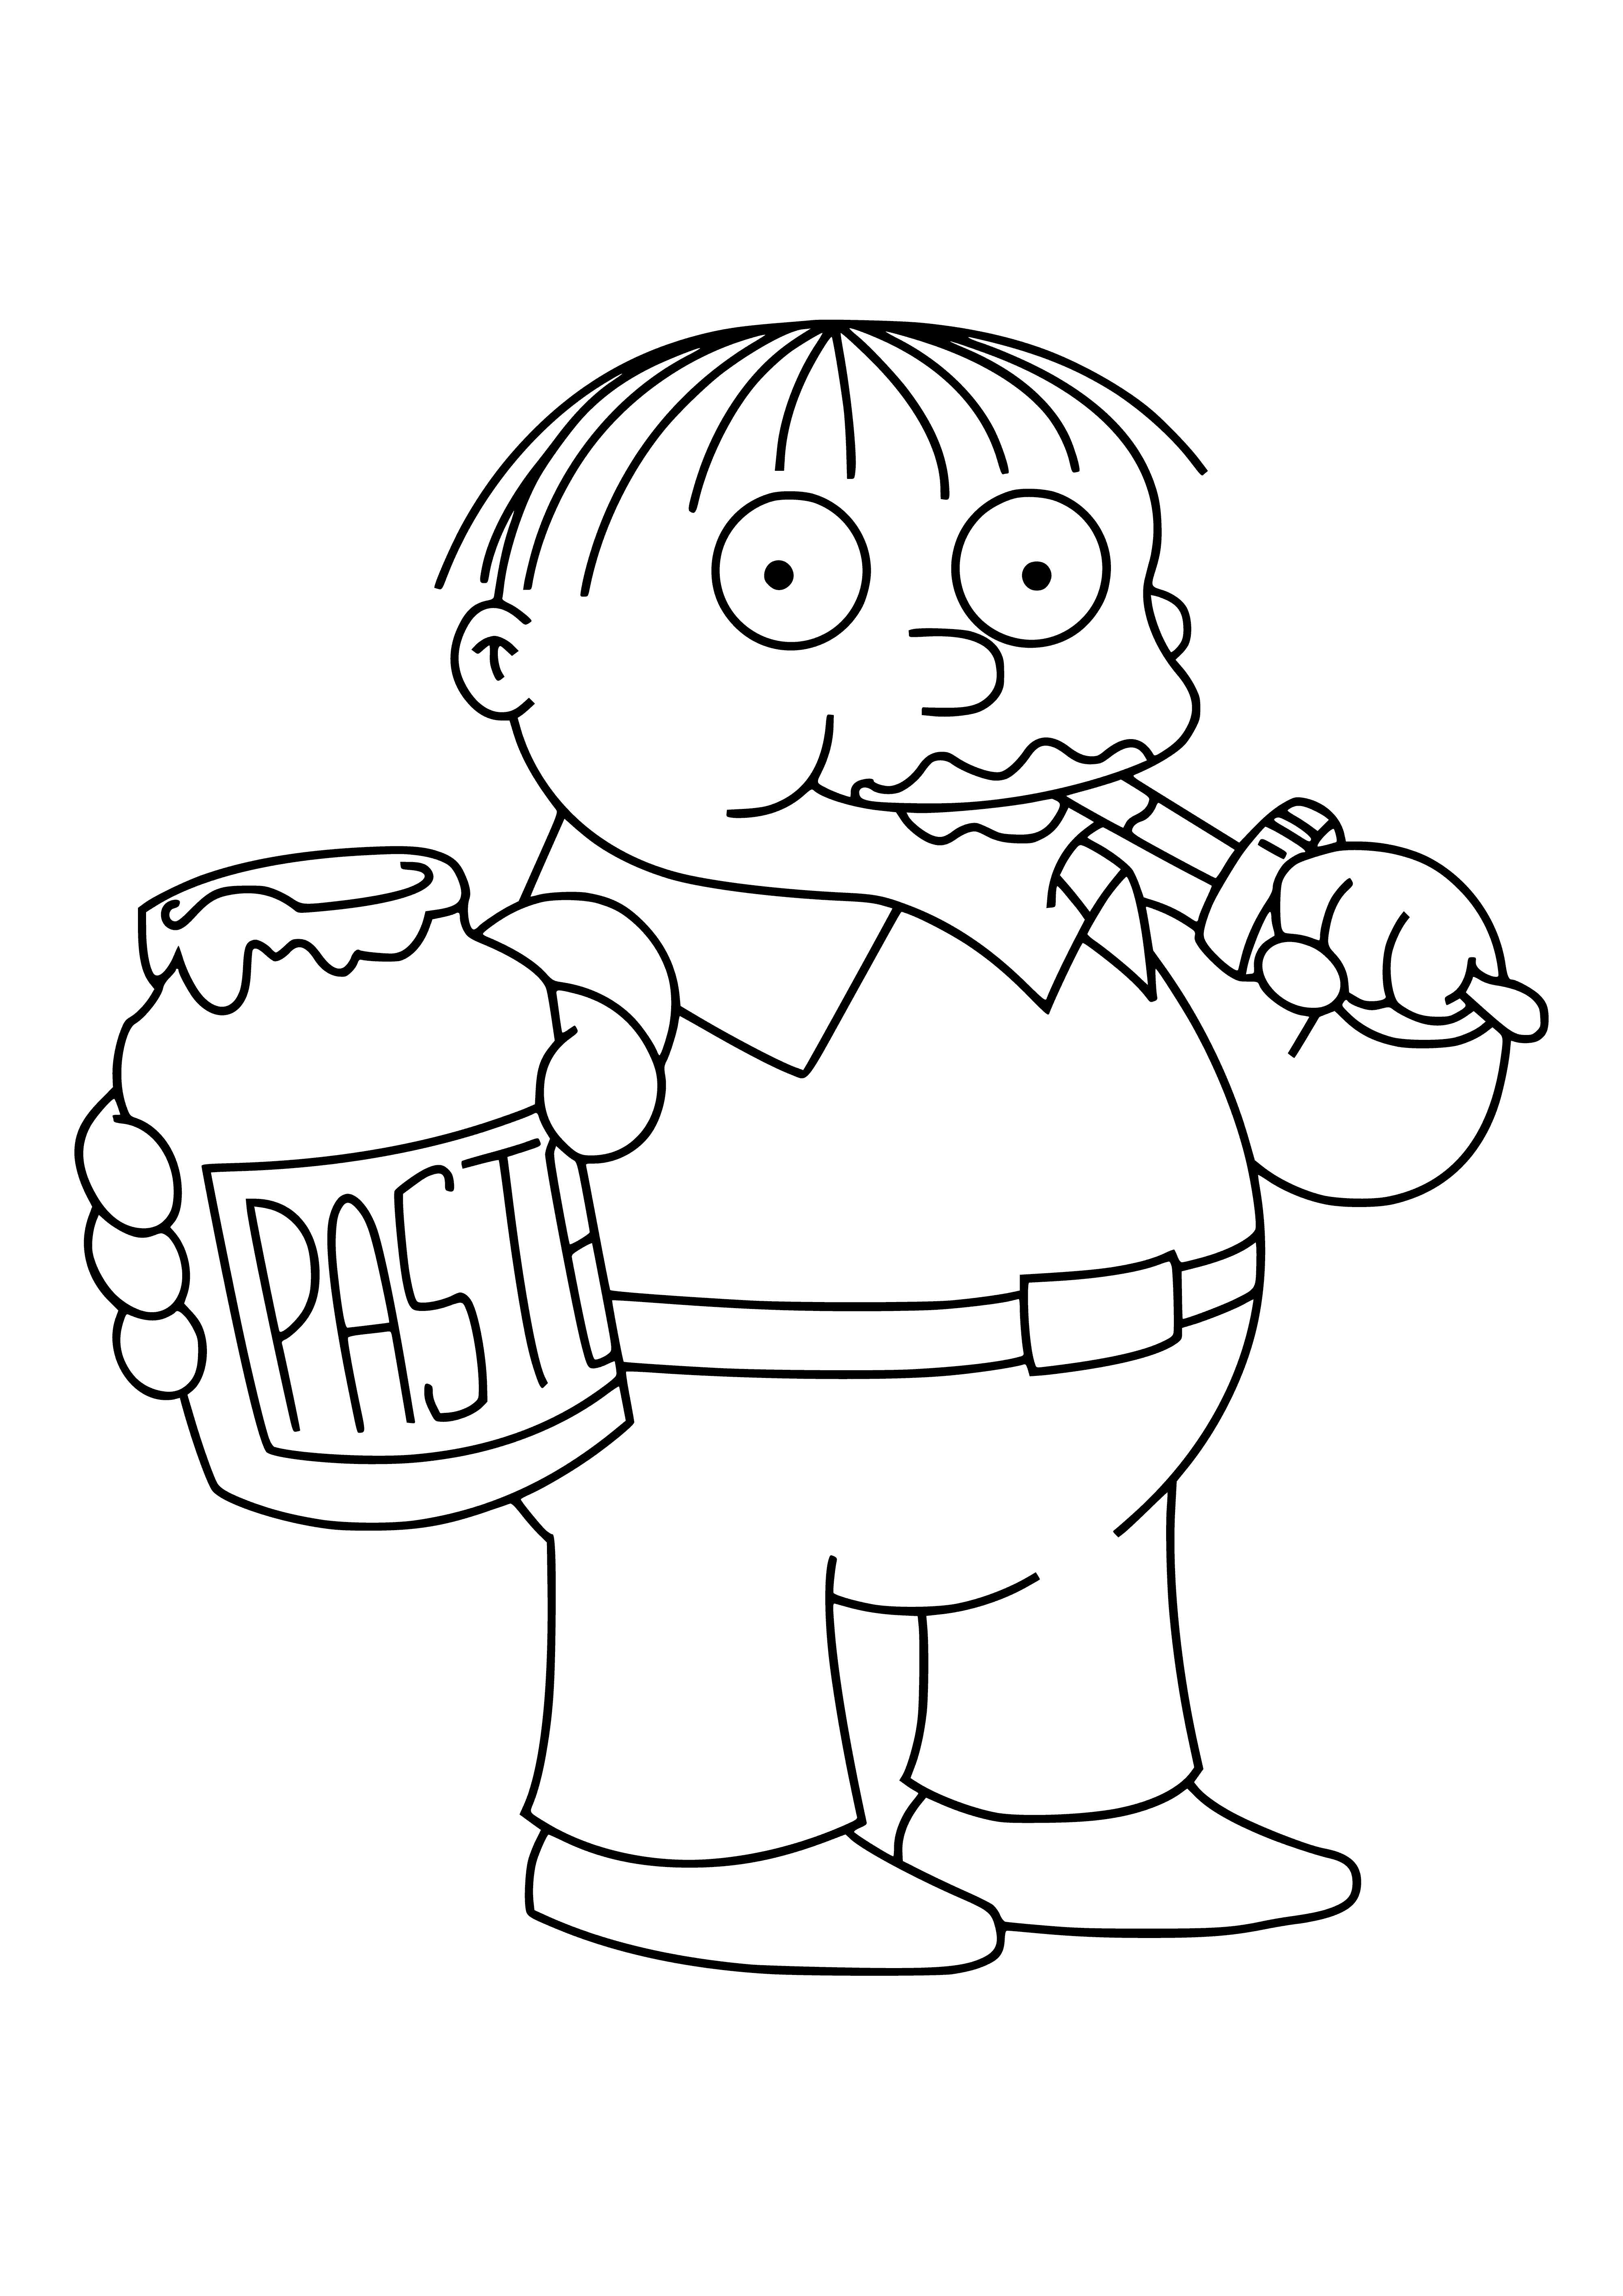 coloring page: A young boy holds a teddy bear in a red shirt, blue pants, and blue tie. His blonde hair and big blue eyes make him look adorable.